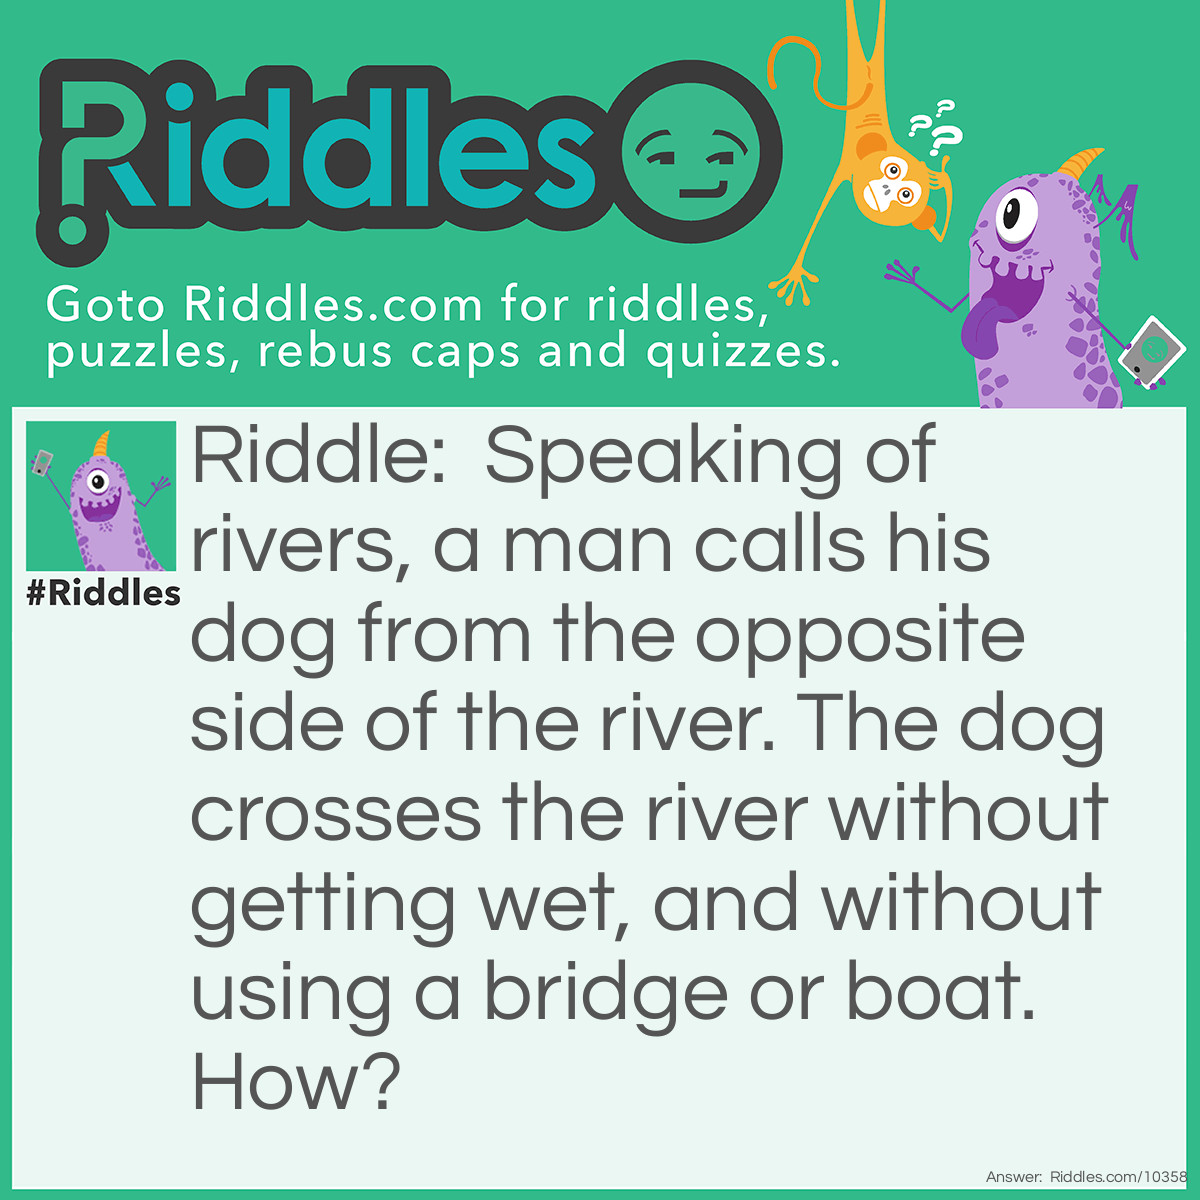 Riddle: Speaking of rivers, a man calls his dog from the opposite side of the river. The dog crosses the river without getting wet, and without using a bridge or boat. How? Answer: The river was frozen.